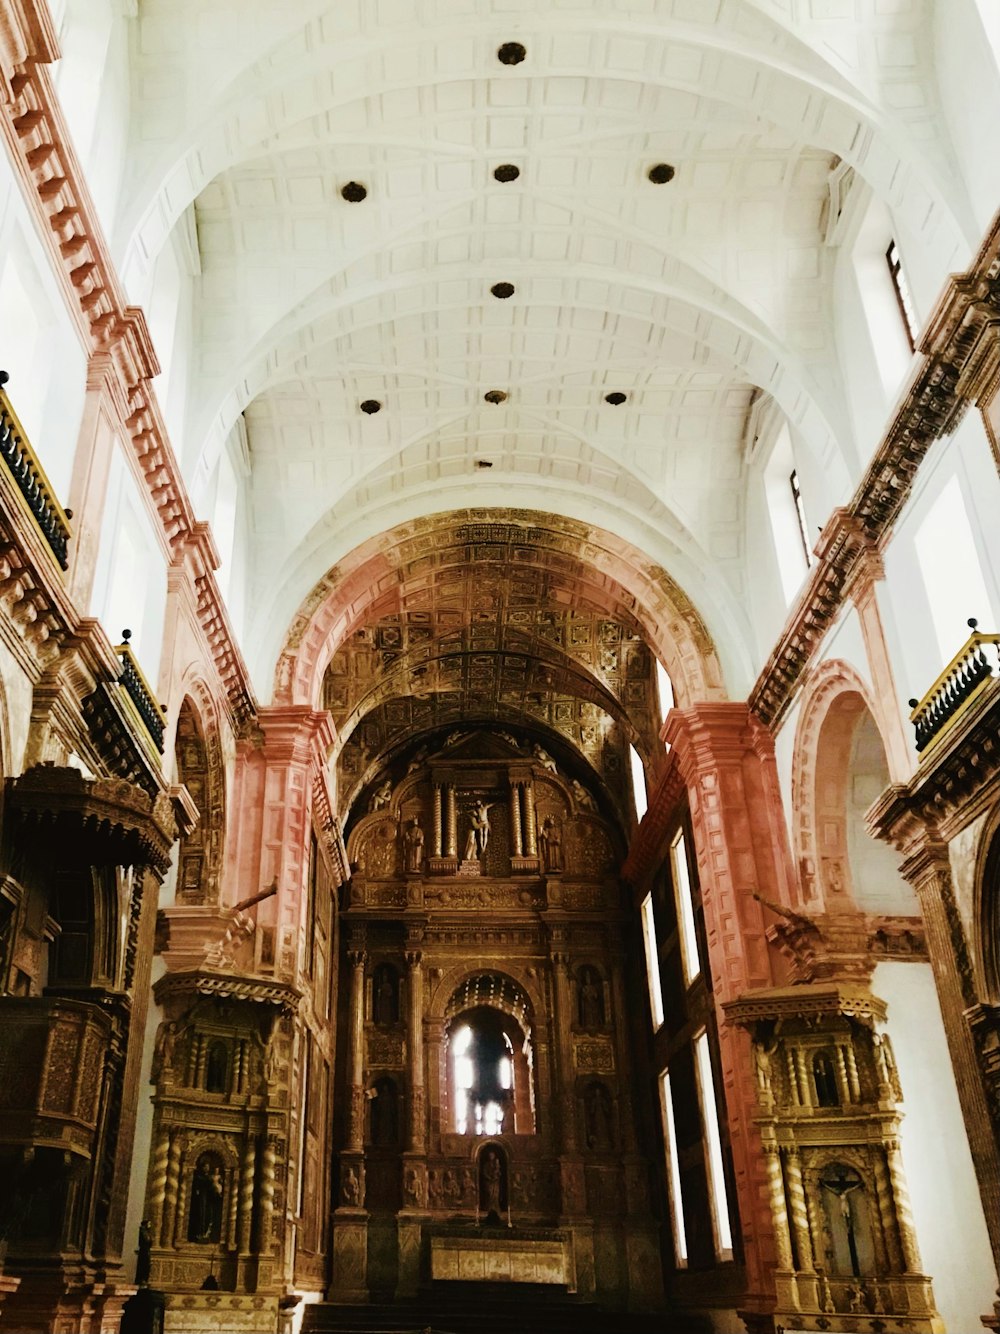 the inside of a church with high ceilings